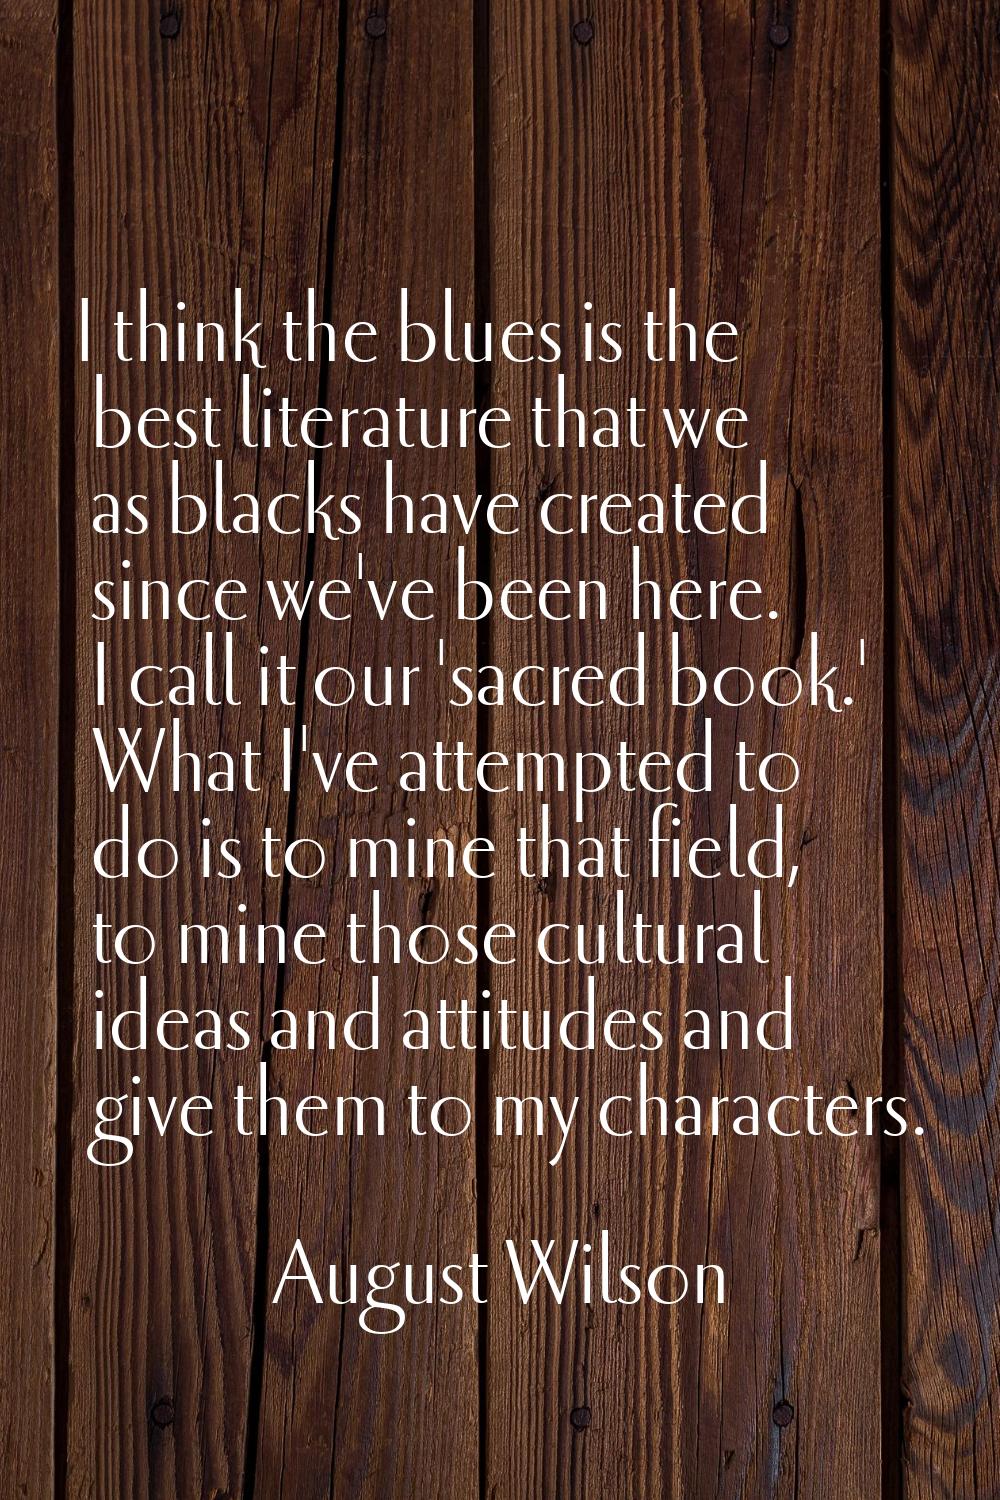 I think the blues is the best literature that we as blacks have created since we've been here. I ca